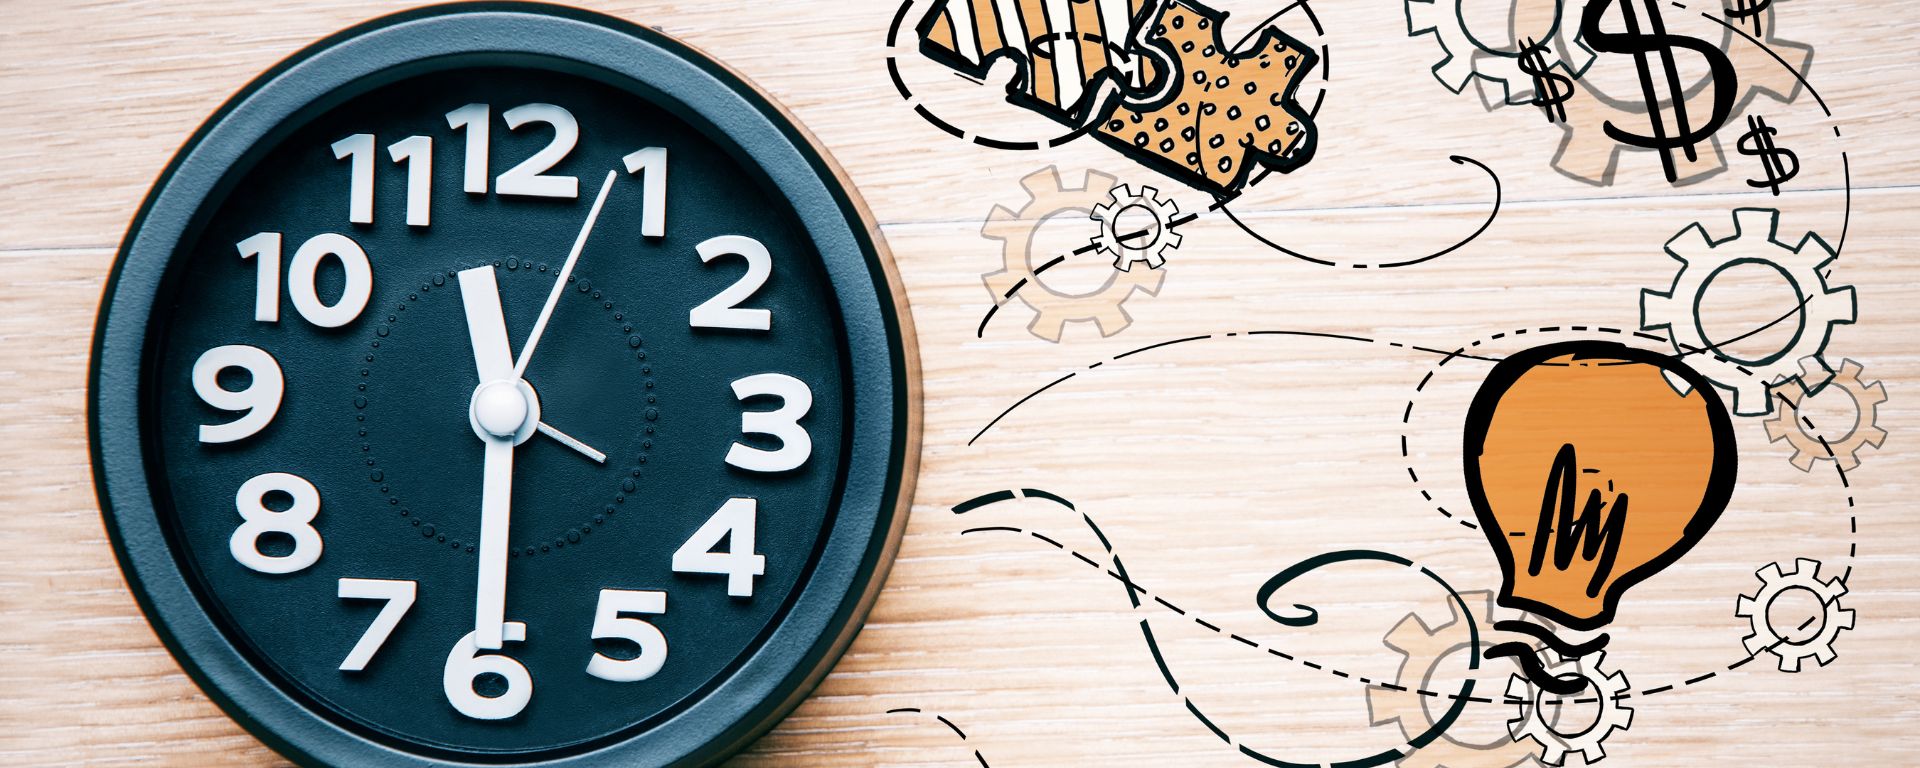 Time Management Hacks For Freelancers - Feature Image